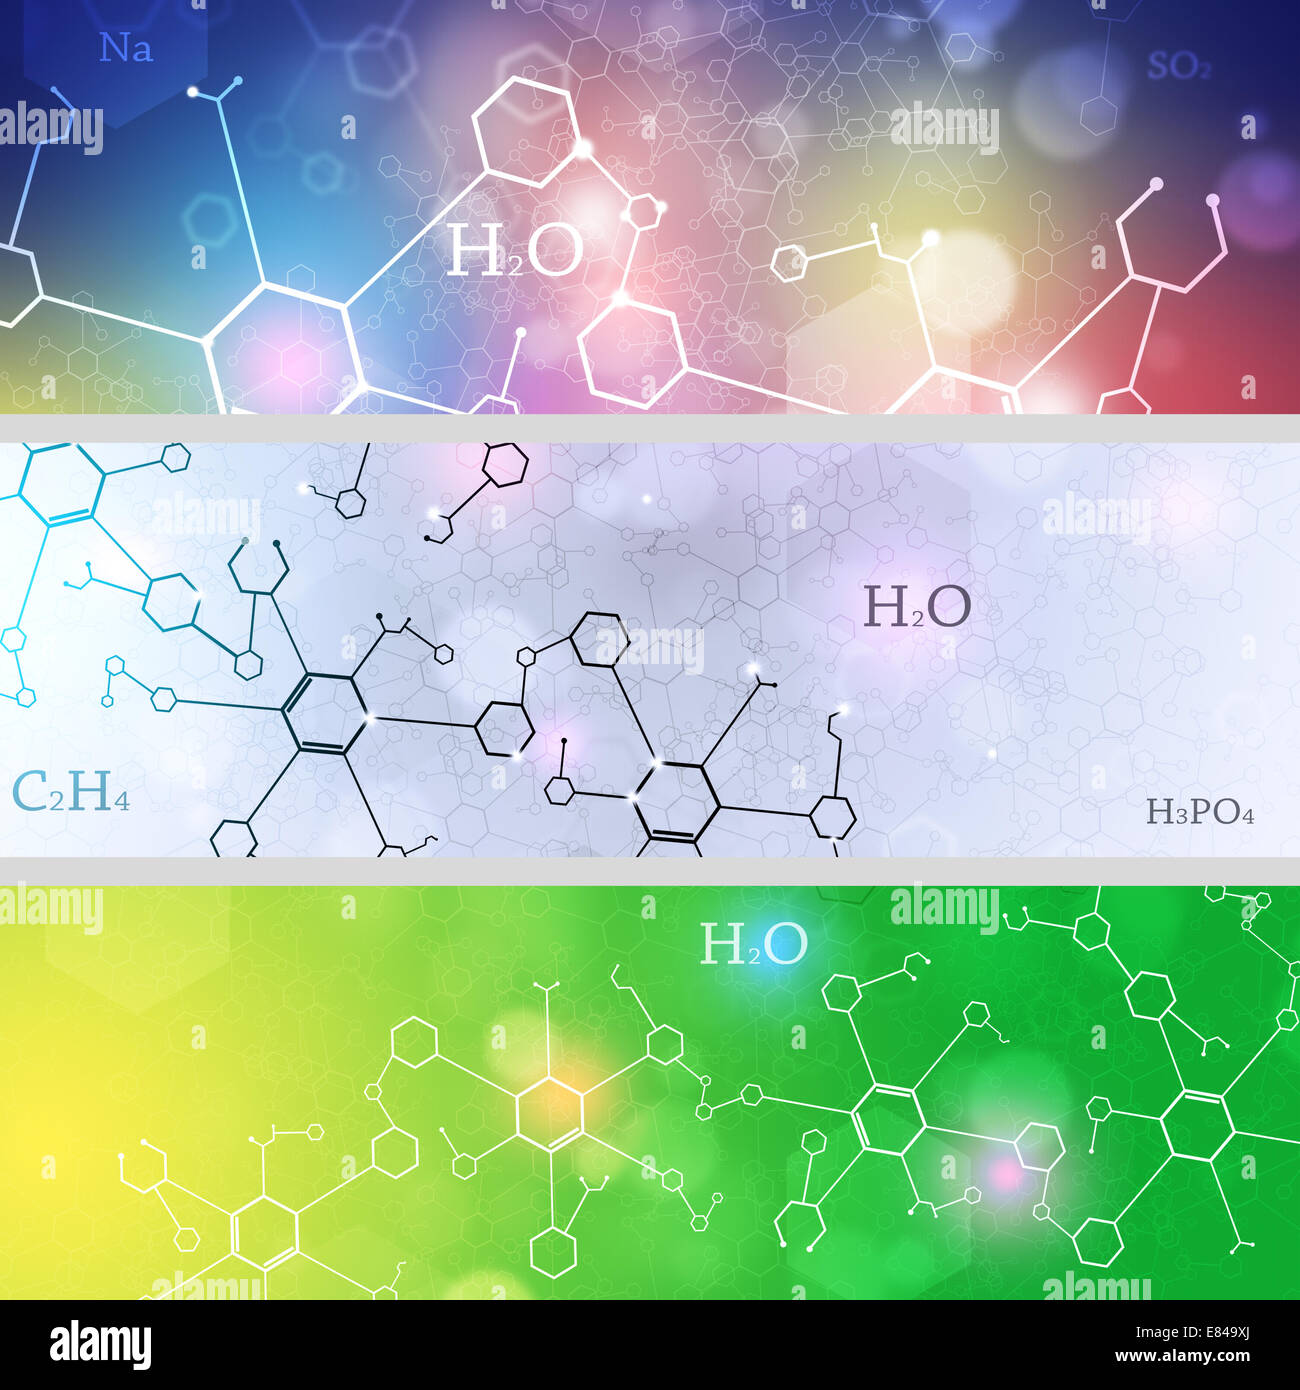 abstract technology and science banners with chemistry elements Stock Photo